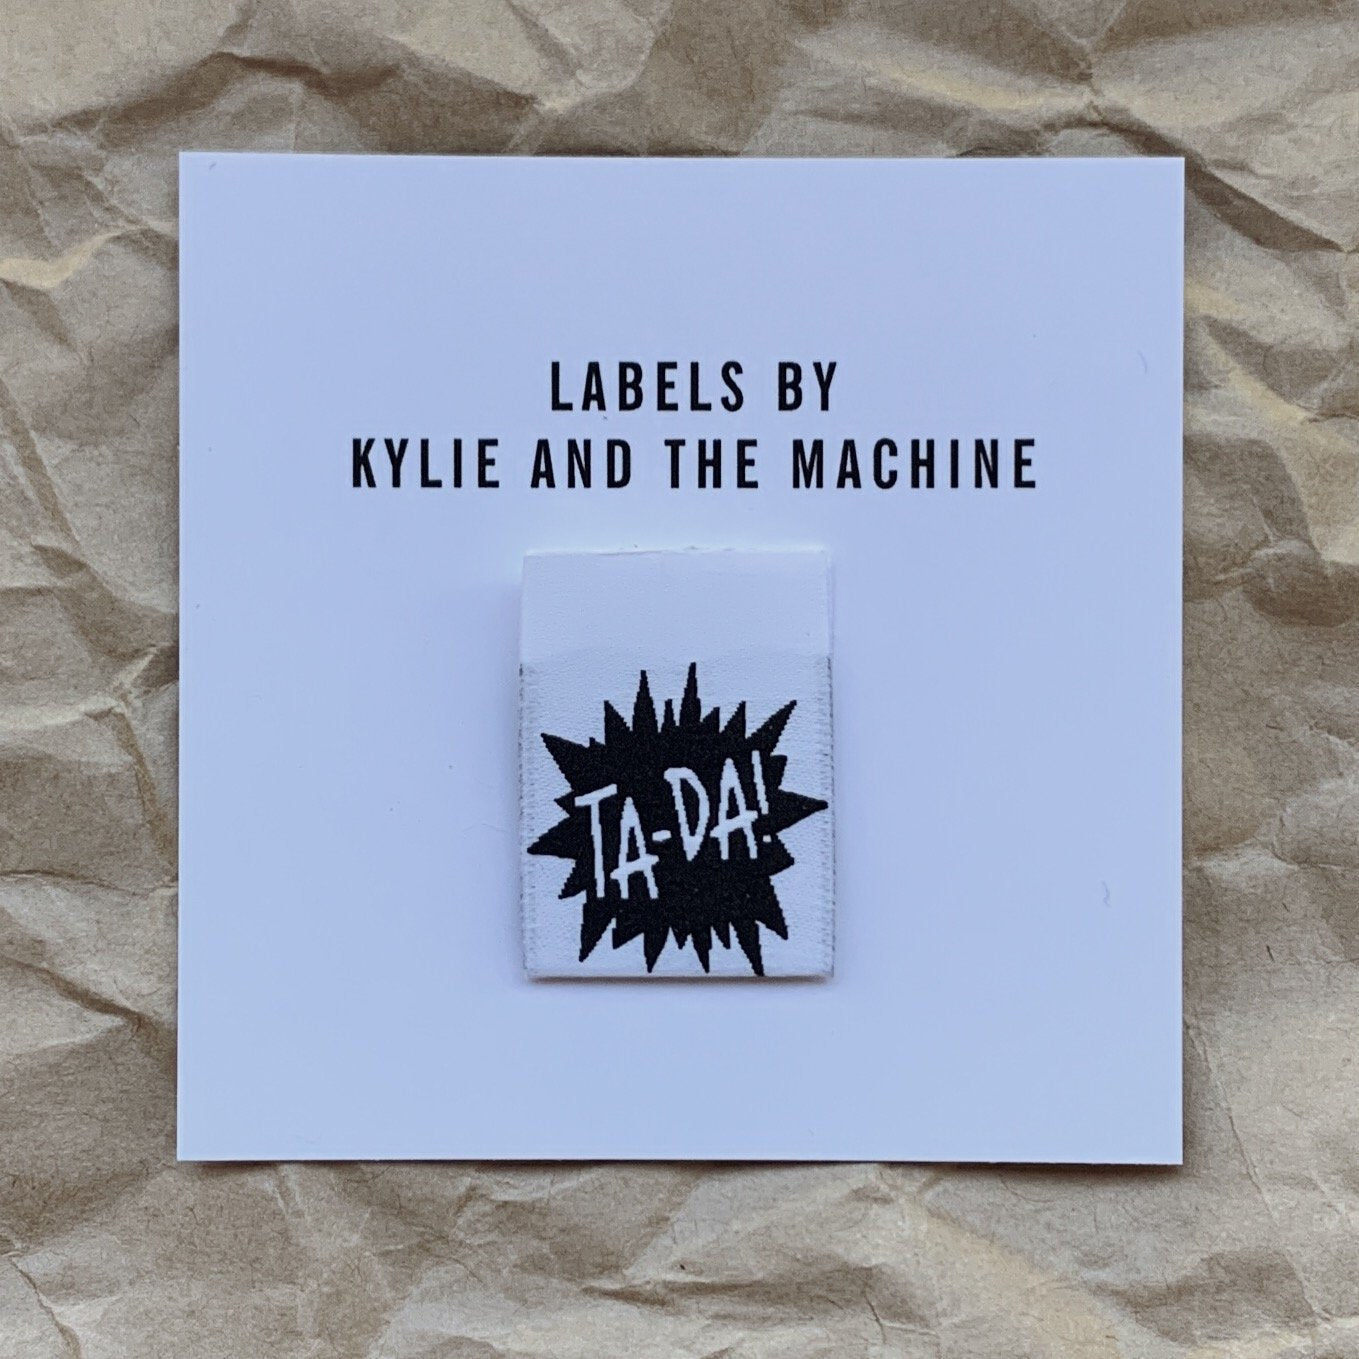 Kylie and the Machine - "TA-DA " Pack of 8 Woven Labels